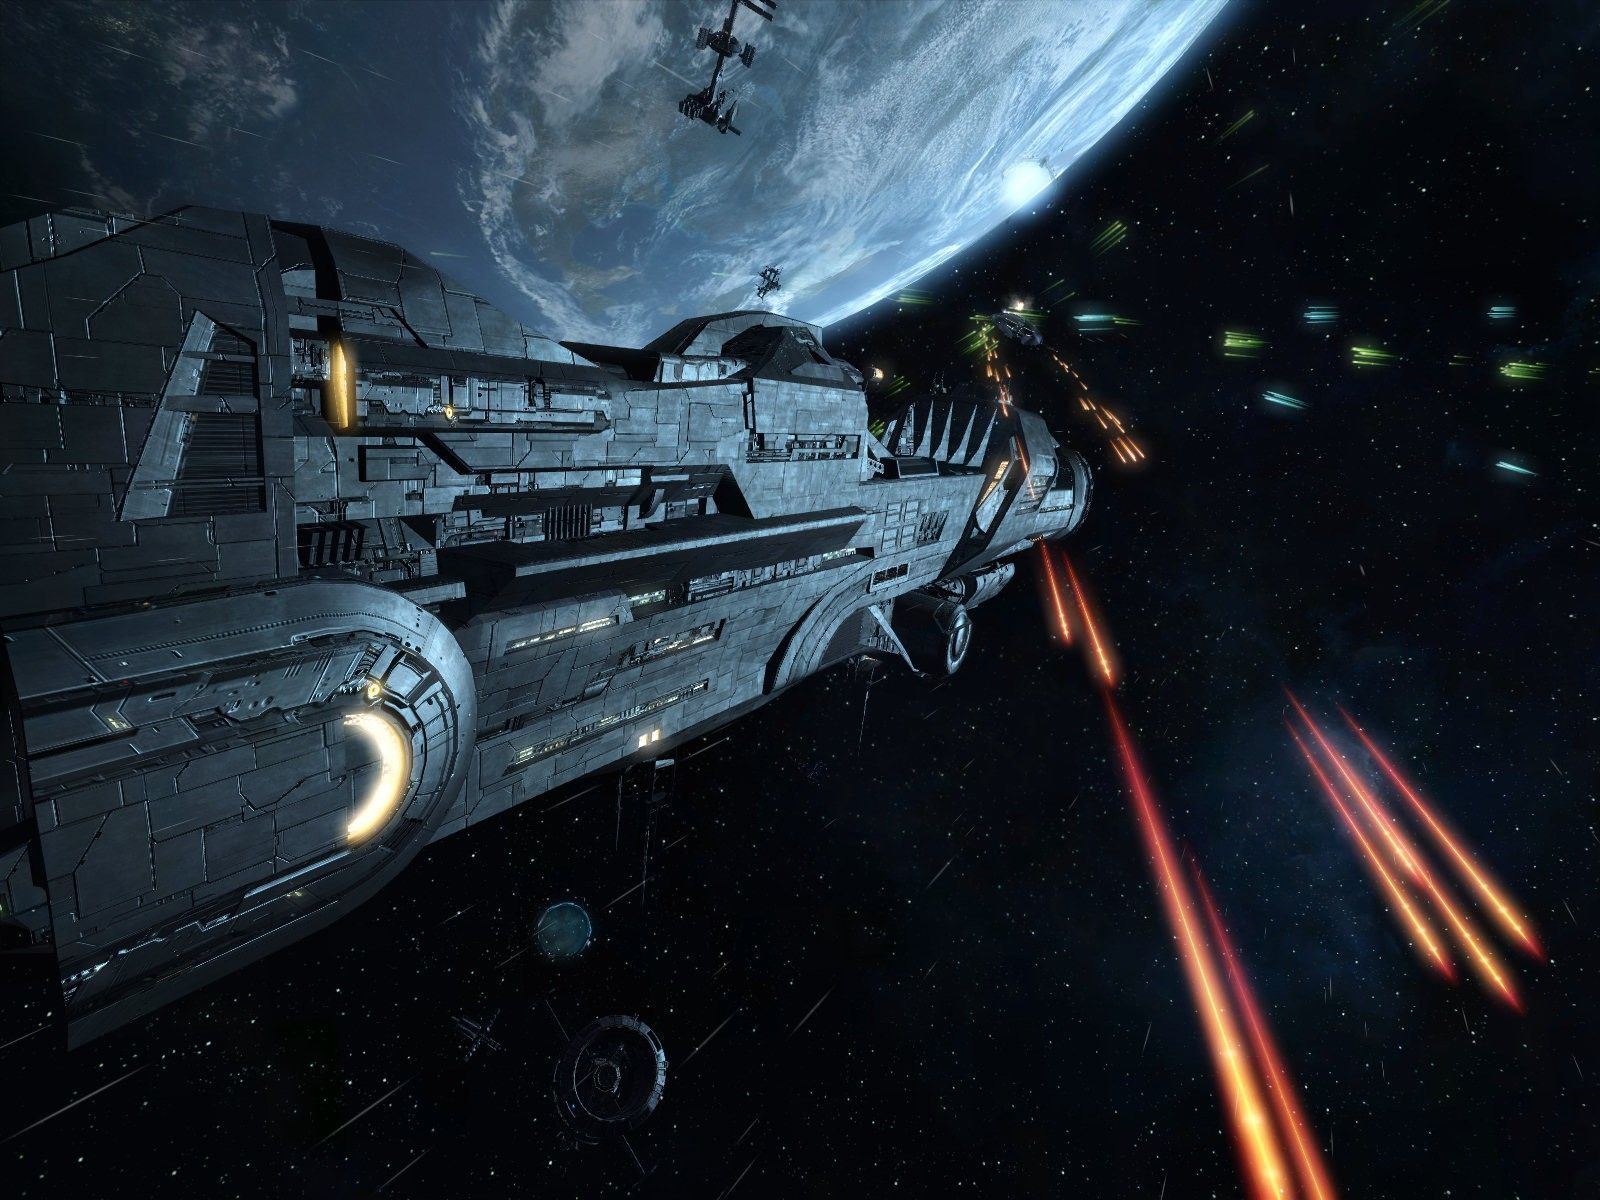 Space Battle Wallpaper to Cover Your Desktop in Glory. Space battles, Stargate universe, Call of duty world